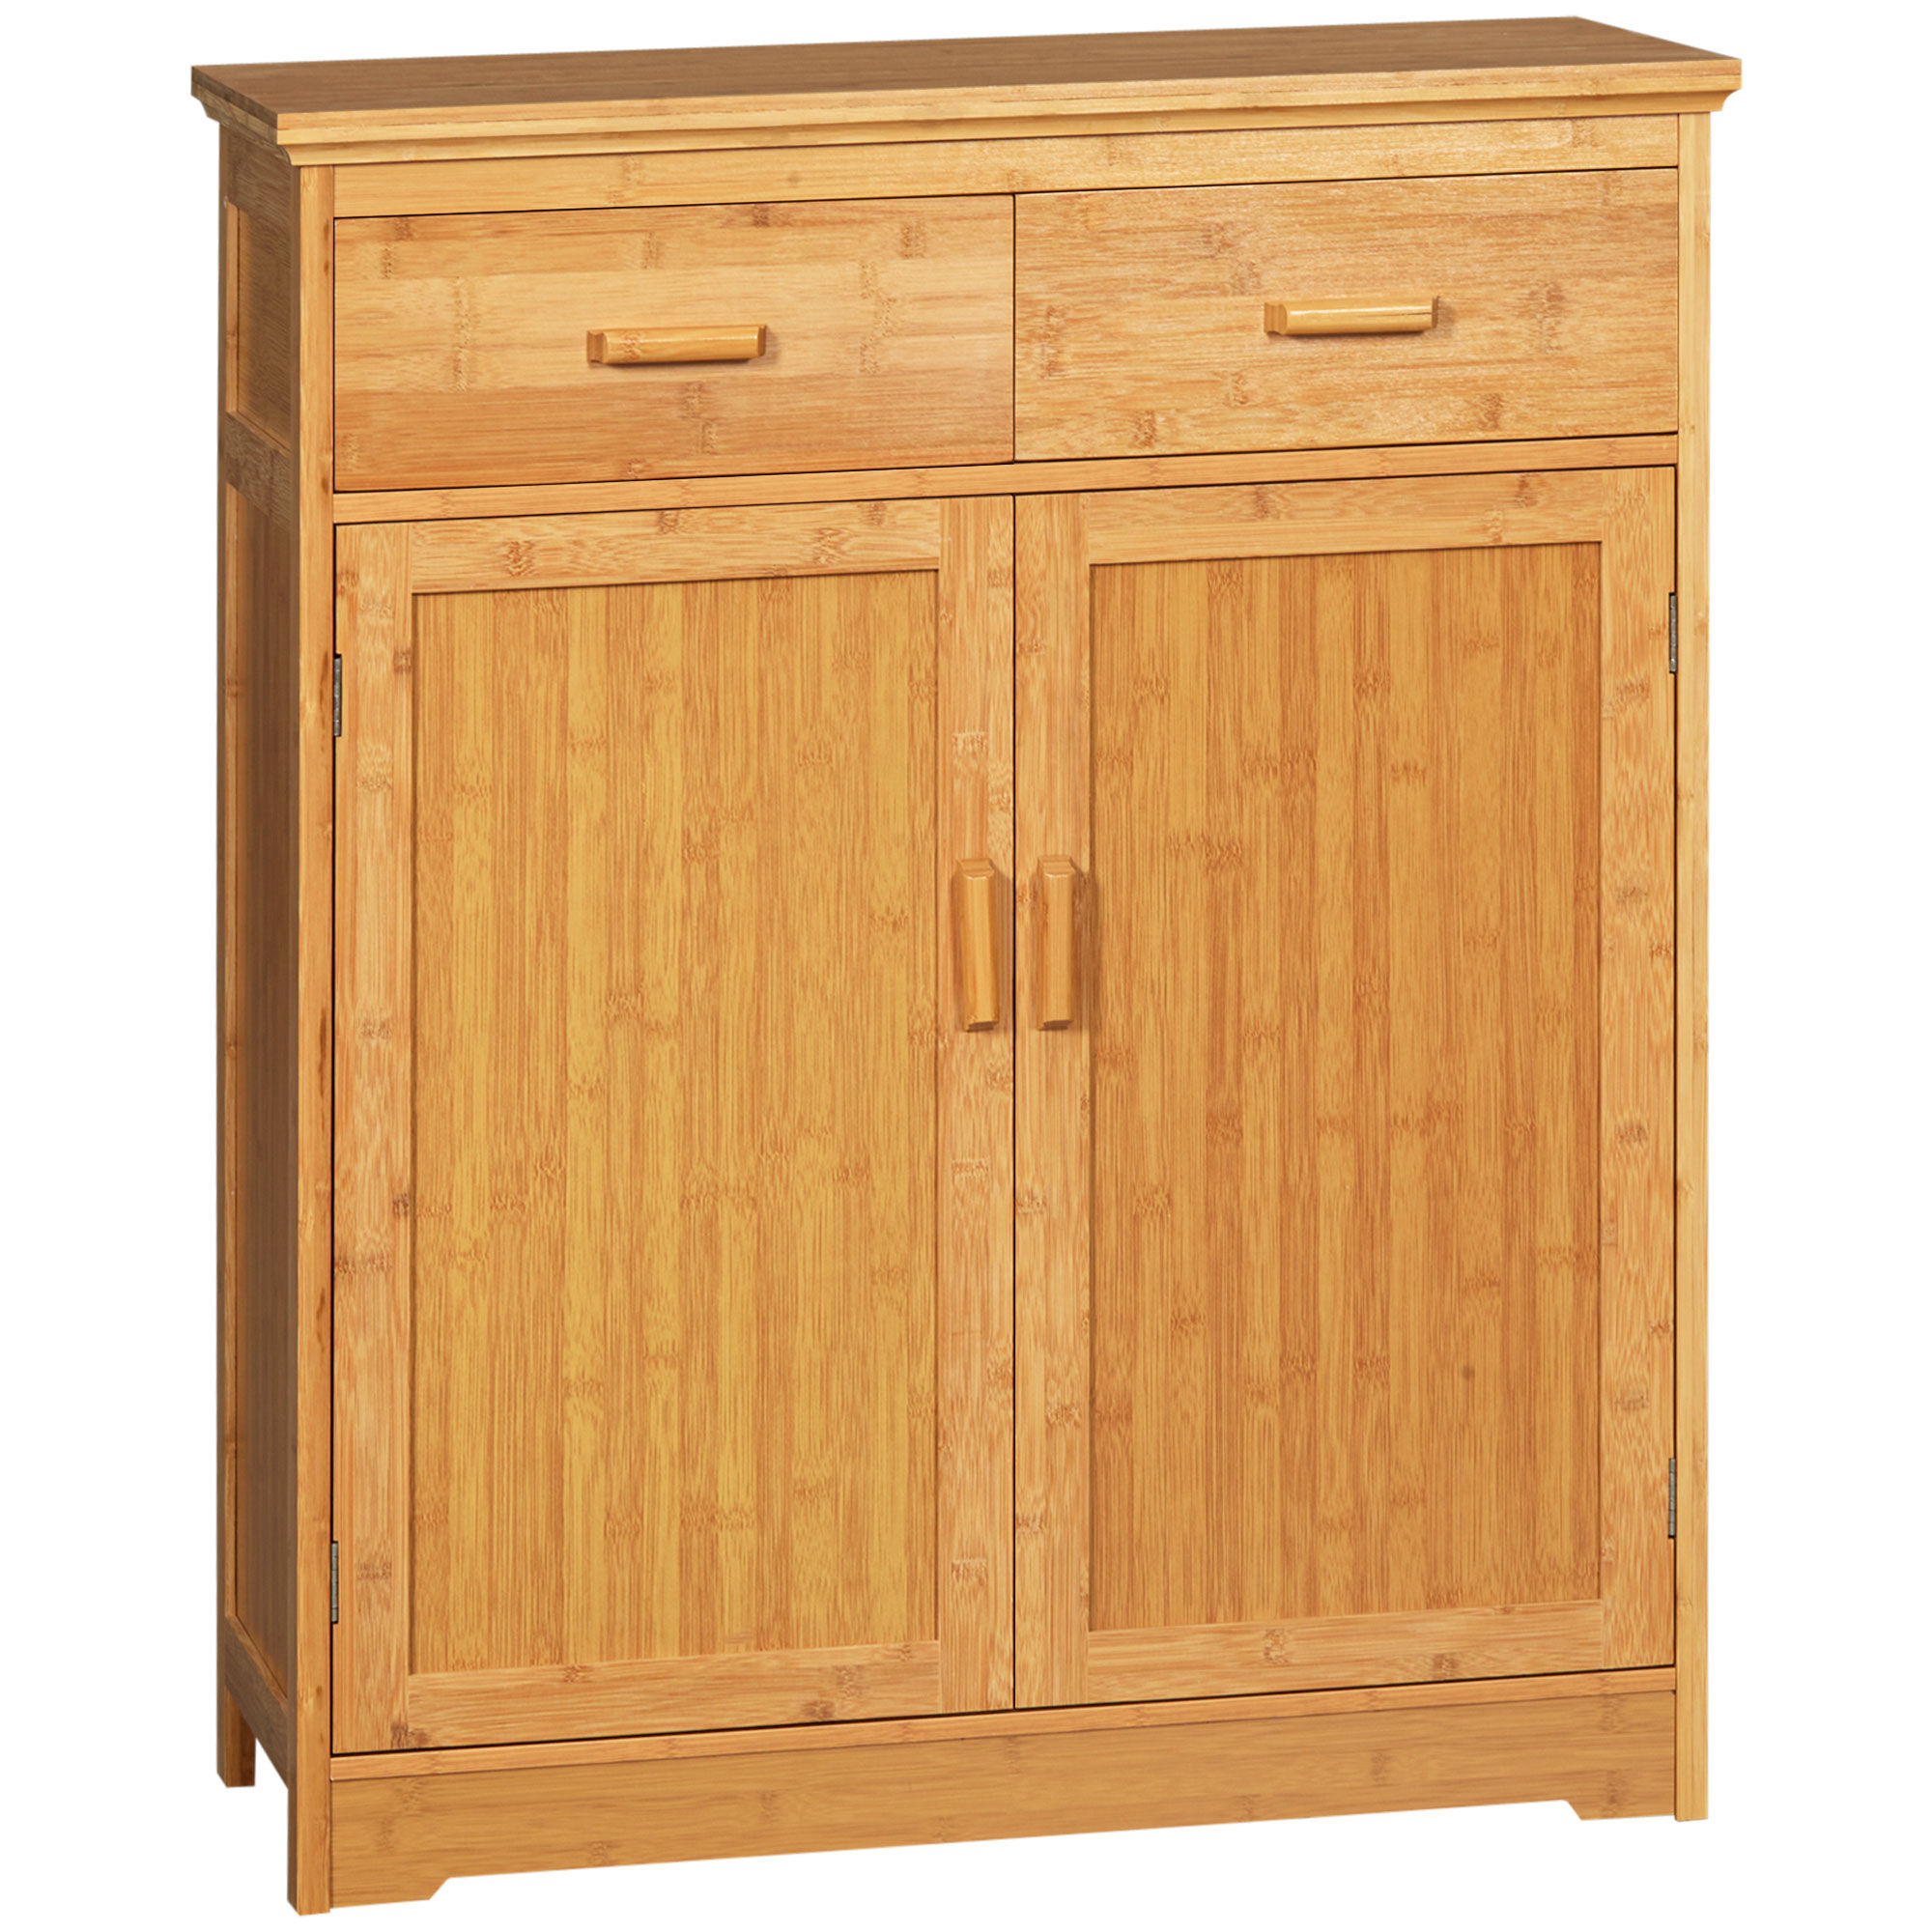 HOMCOM Kitchen Storage Cabinet Bamboo Buffet with Drawers Doors Adjustable Shelves Dining Room Natural   Aosom.com